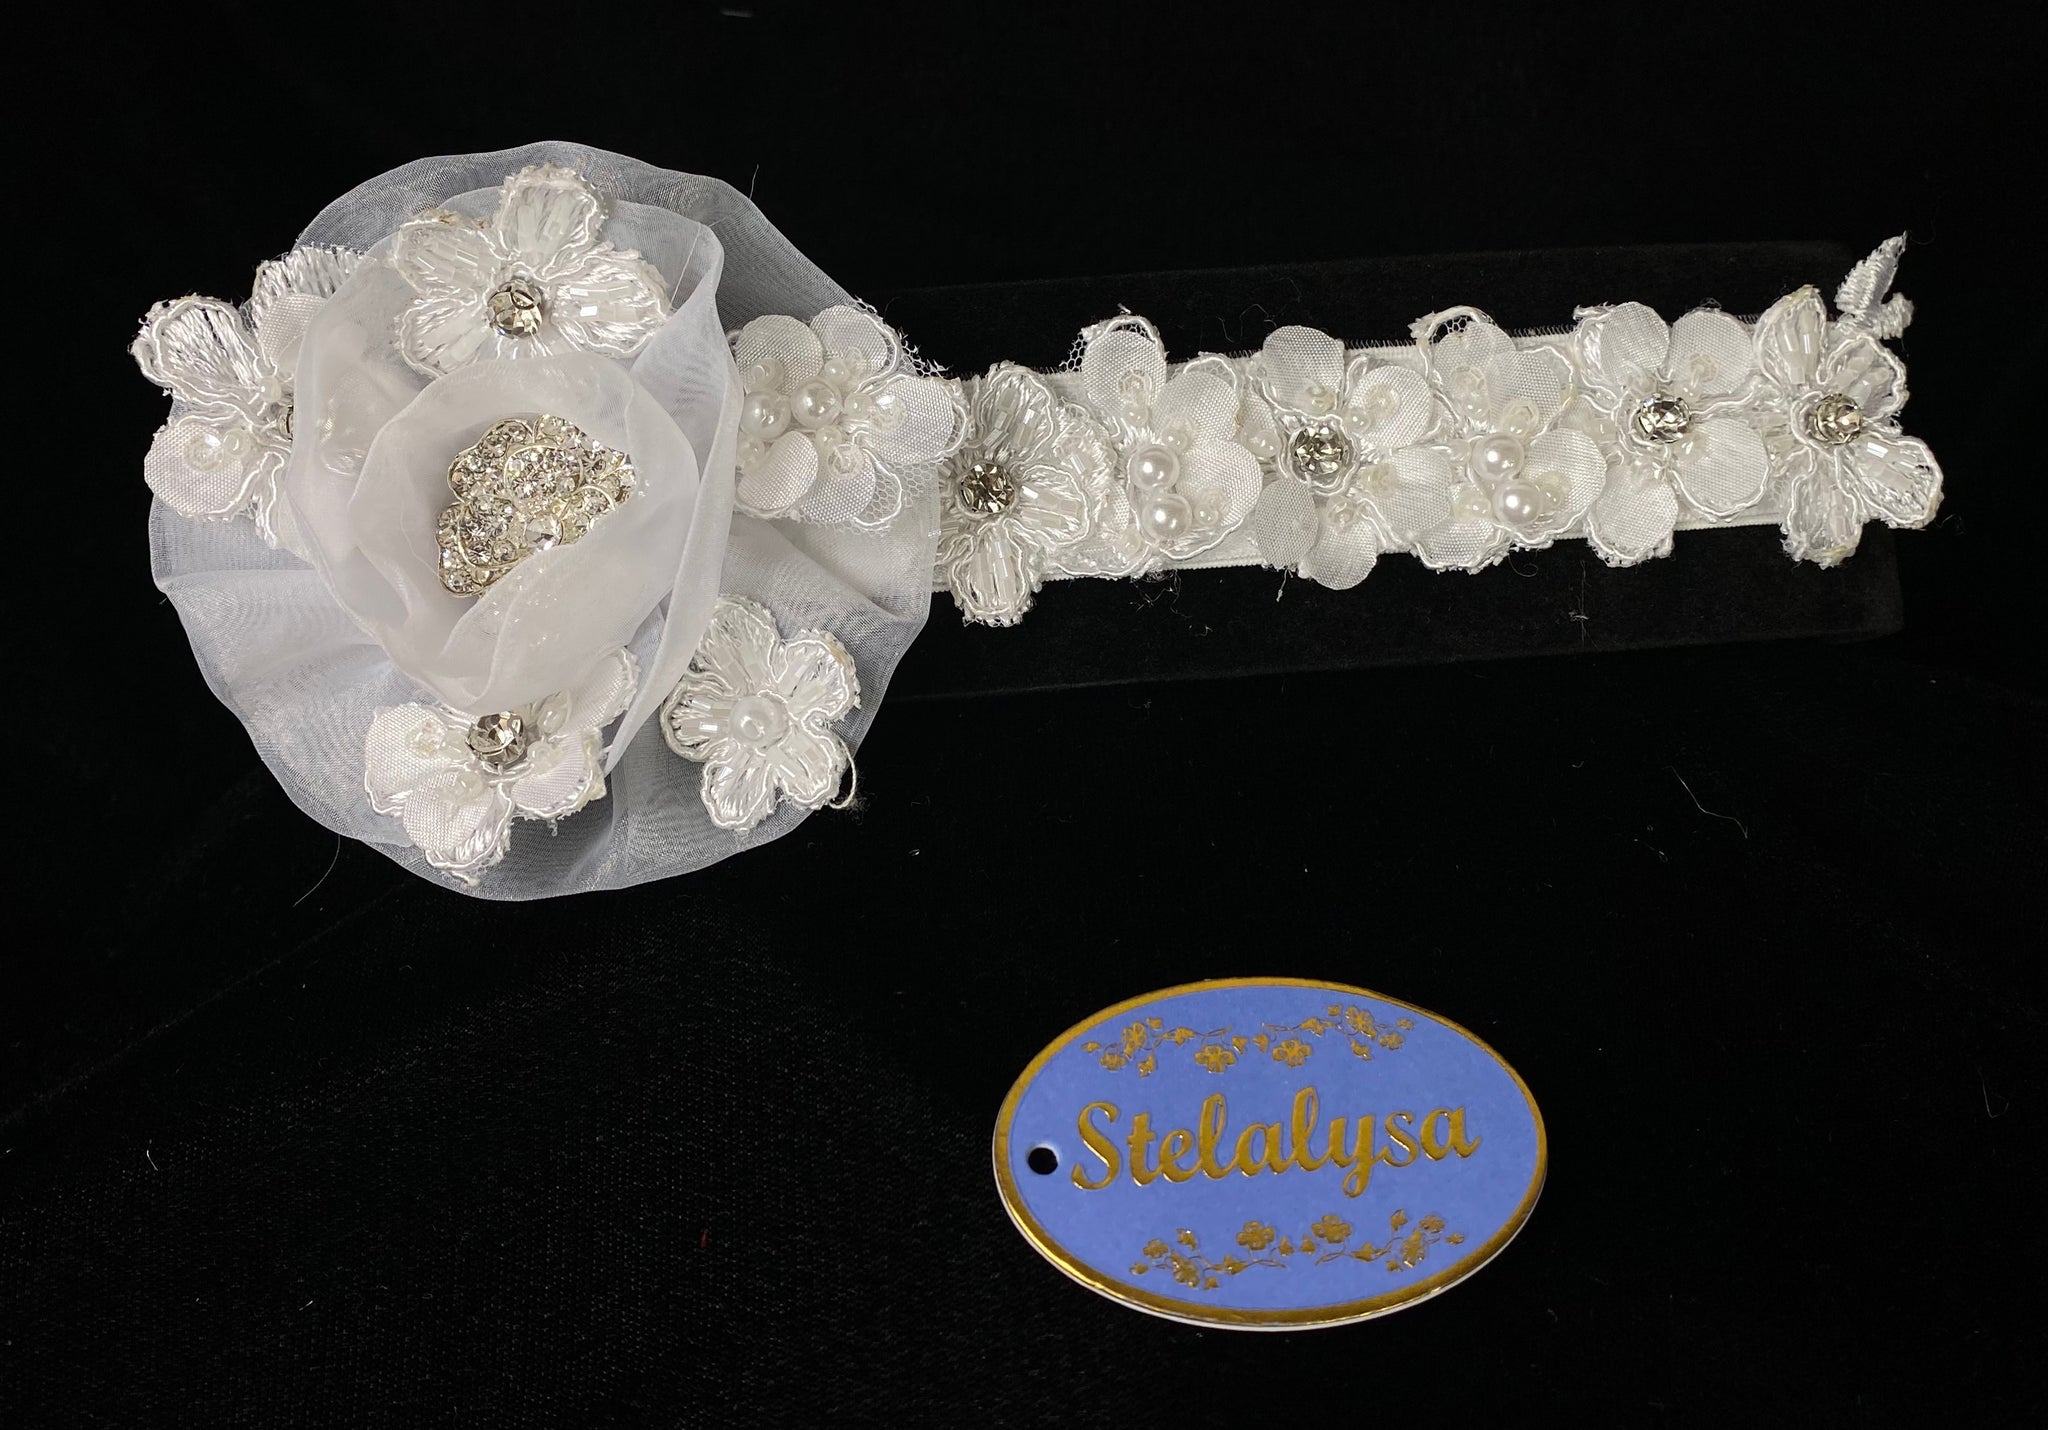 Baptism Headwrap  This is an elegant handmade and one-of-a-kind white headwrap with a large tulle flower with smaller flowers on petals with pearls and rhinestones.  The band has the same small flowers.  Each flower is unique and beautiful.  Headwrap is made of soft cotton lace elastic.  This headwrap can be worn with a white baptism dress/gown.  Your baby will look like the little princess she is with this headwrap on her special day!  